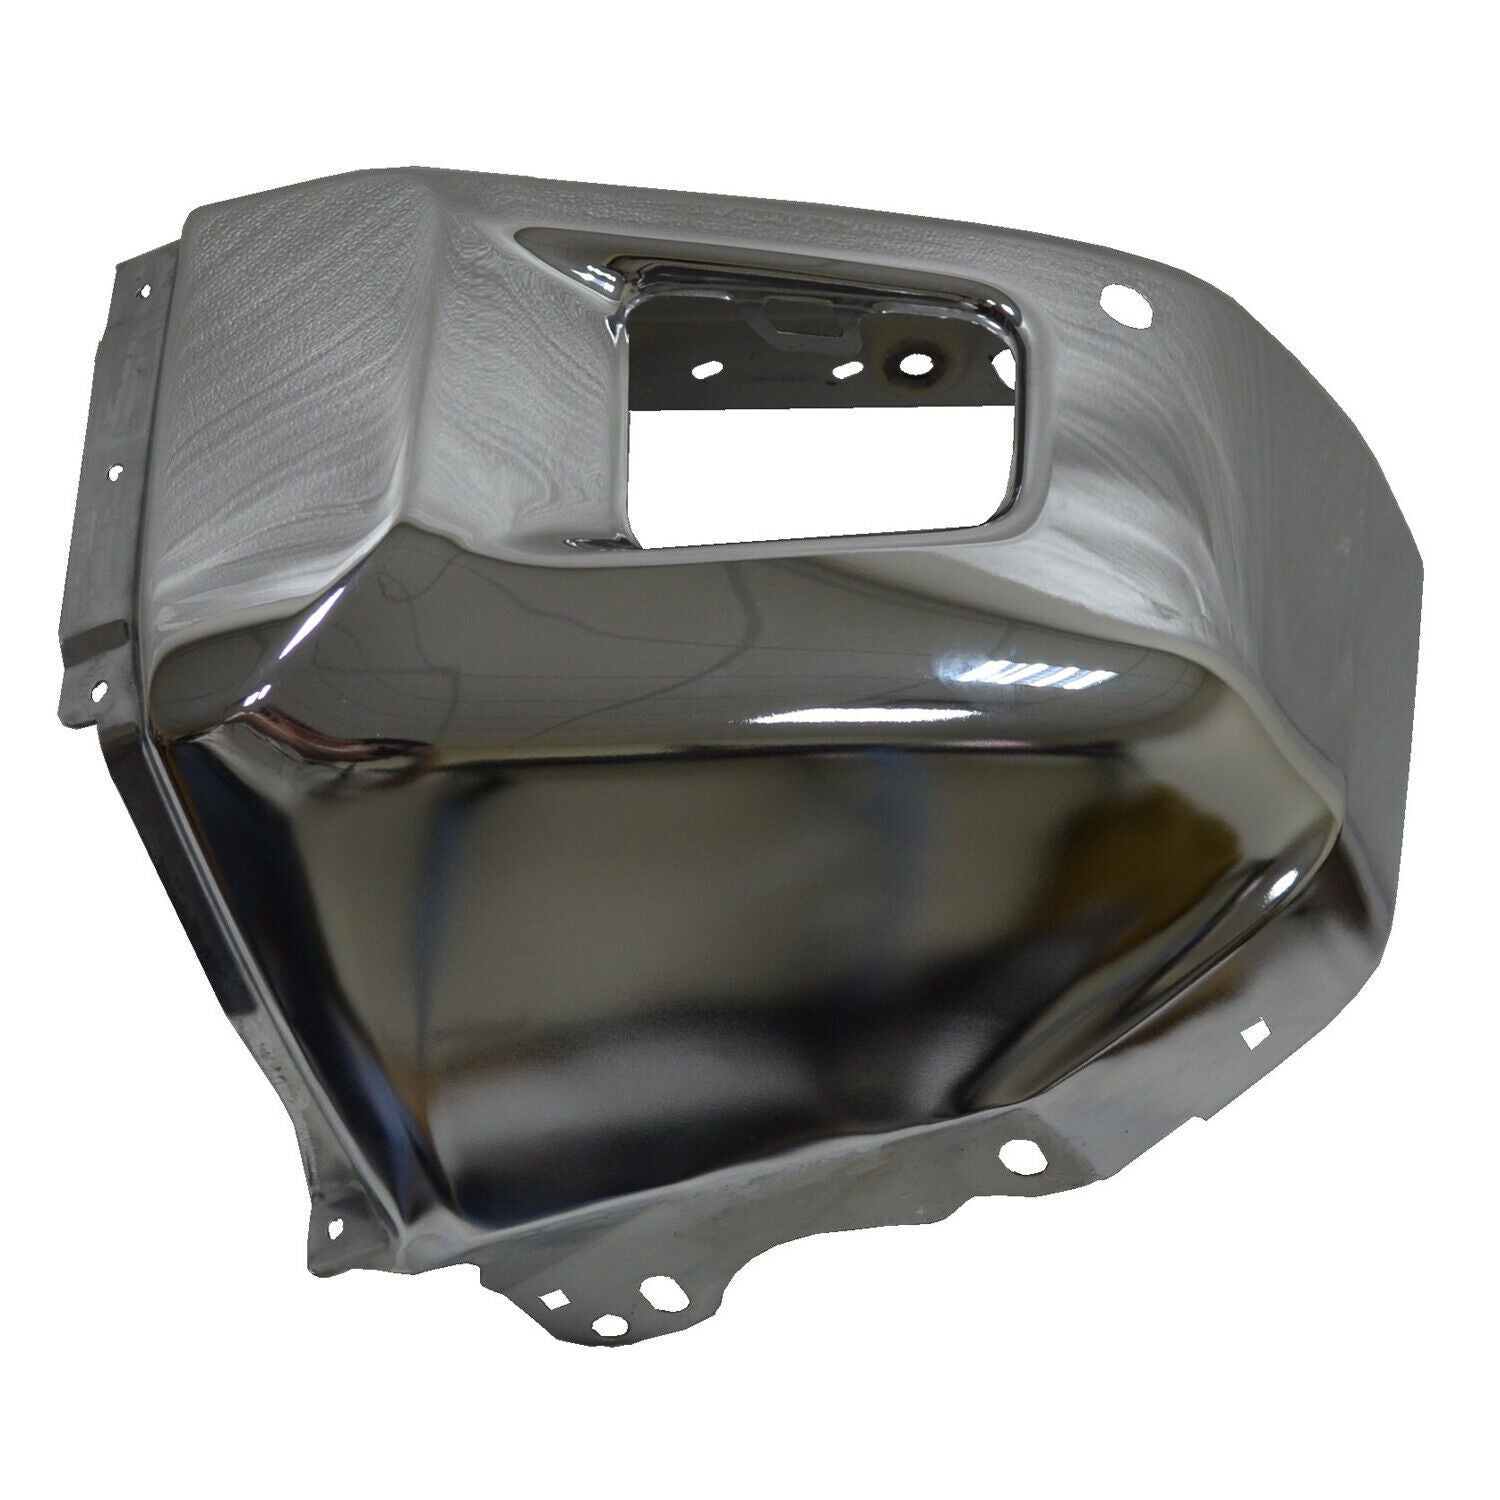 2014-2021 TOYOTA TUNDRA; LT Front bumper end; LIMITED/SR5/171994 EDITION w/Sensor Hole CHR Painted to Match